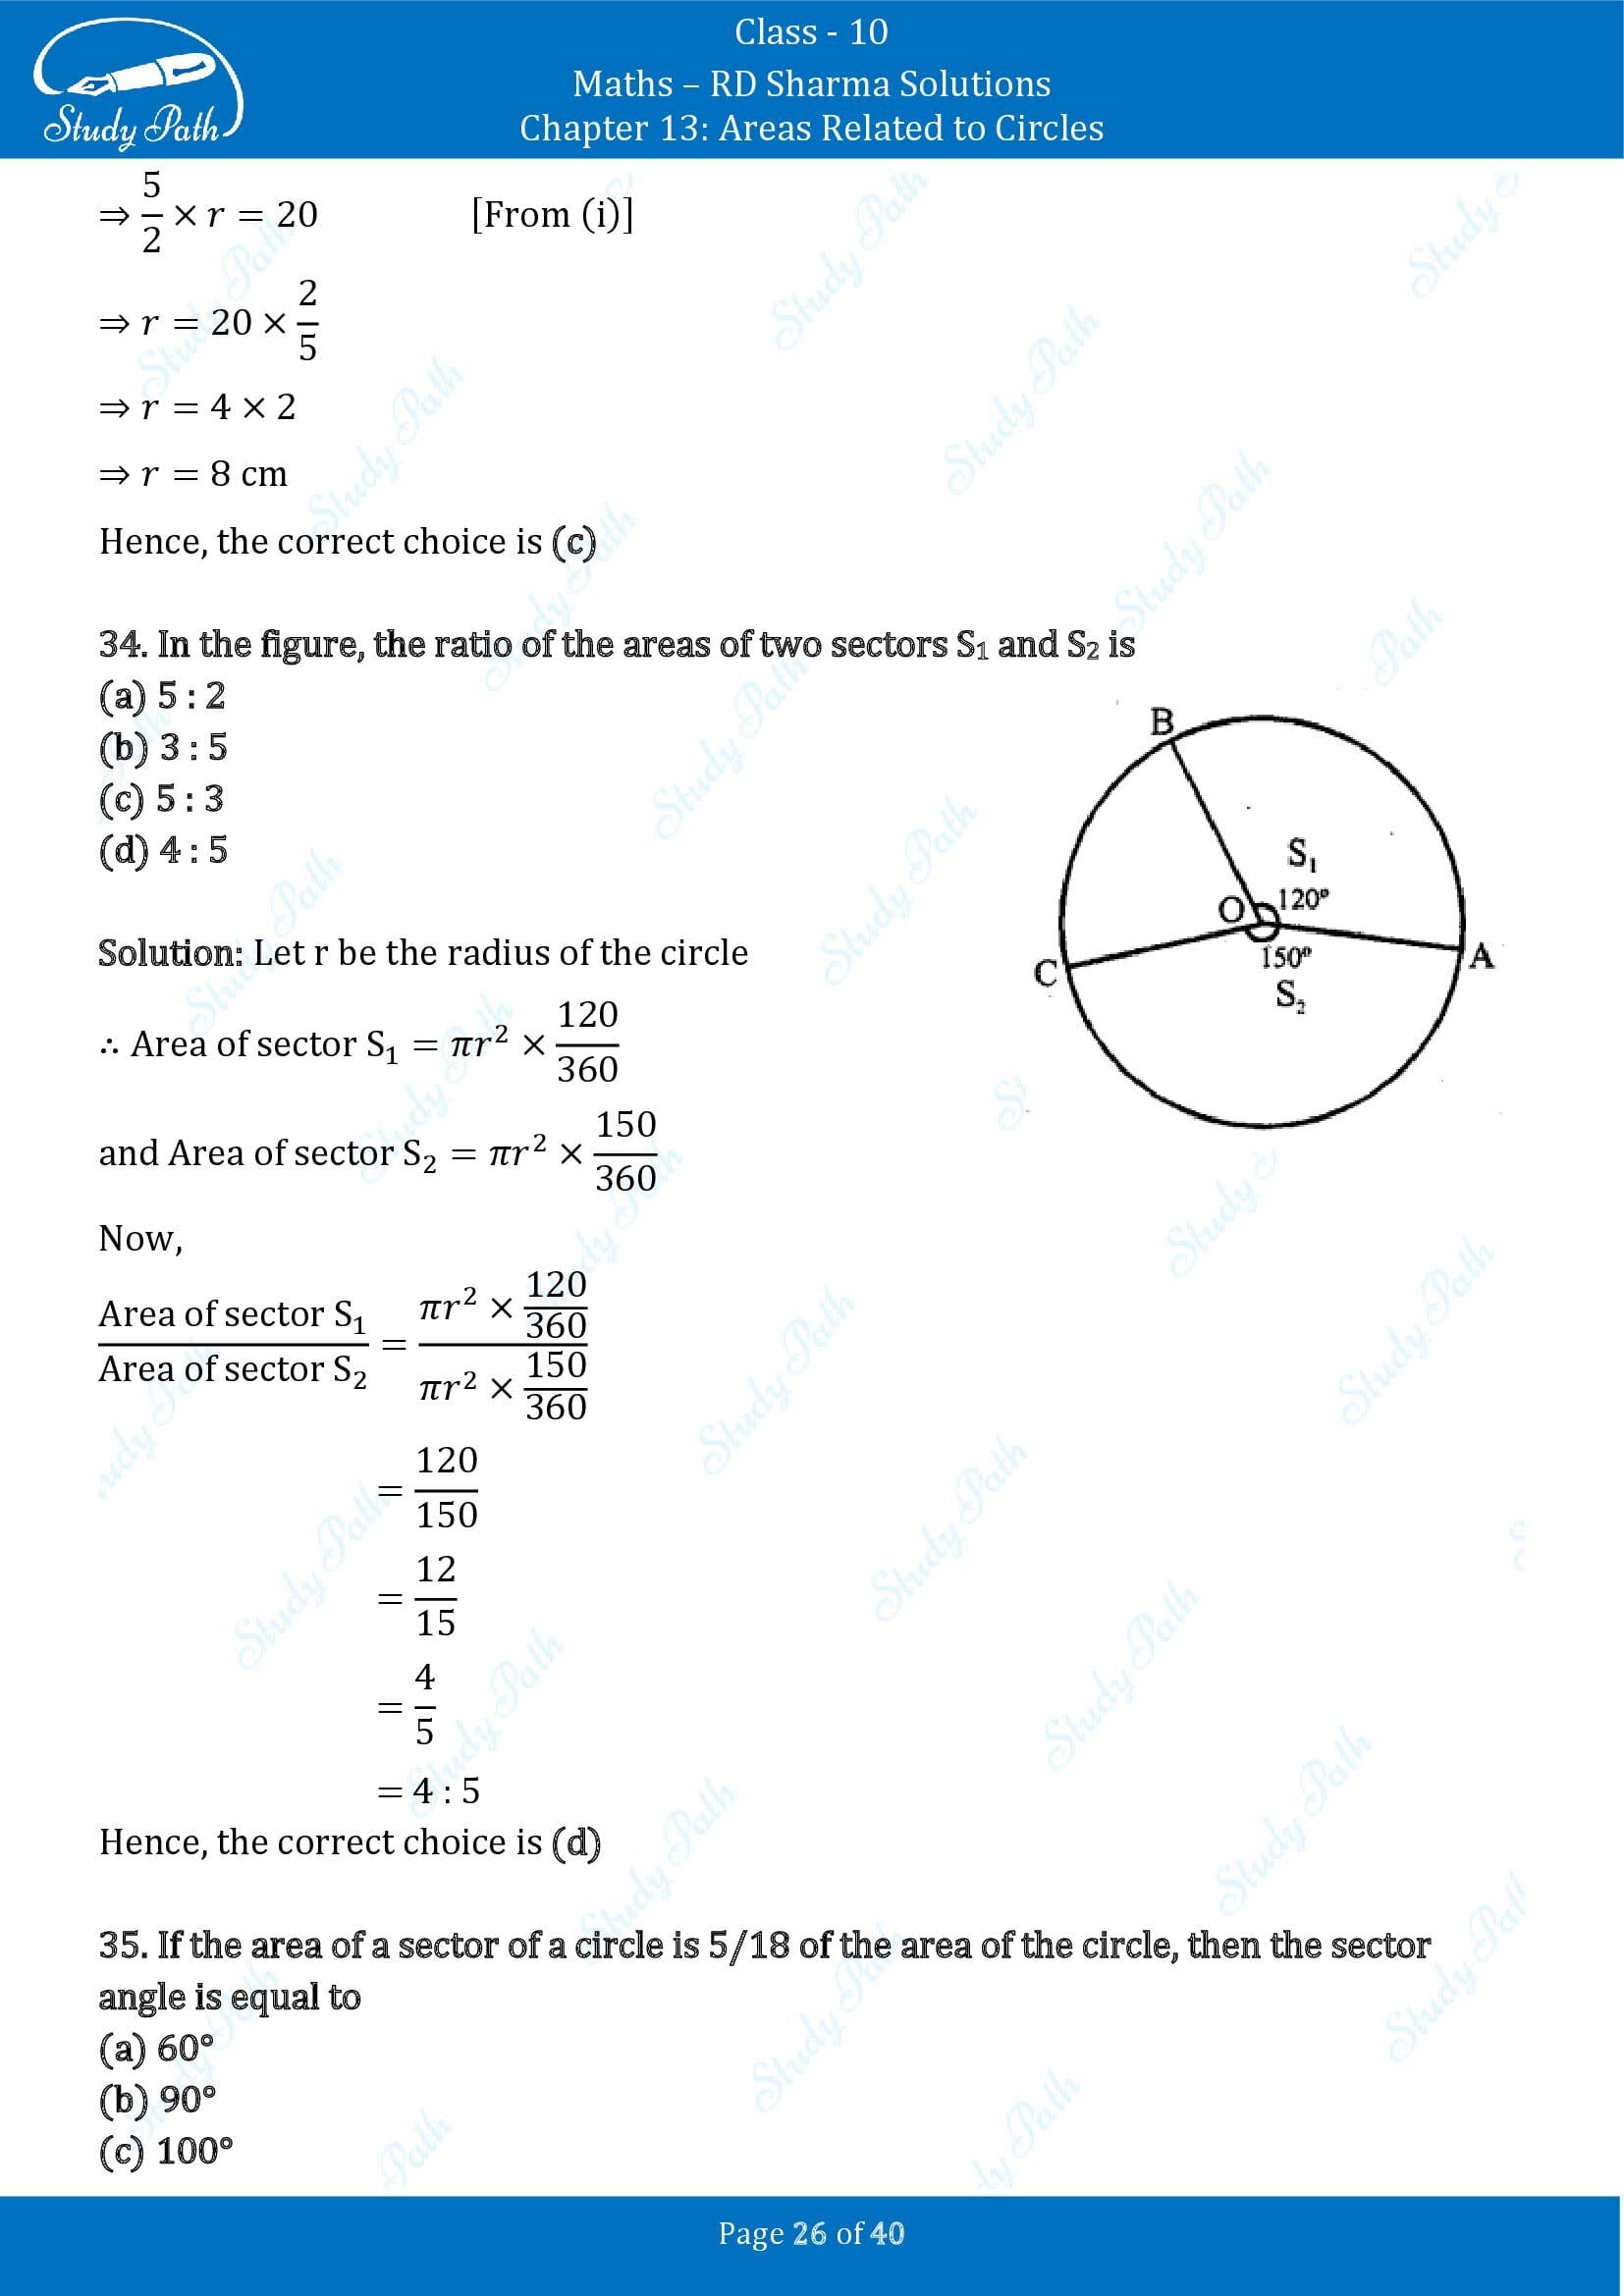 RD Sharma Solutions Class 10 Chapter 13 Areas Related to Circles Multiple Choice Question MCQs 00026